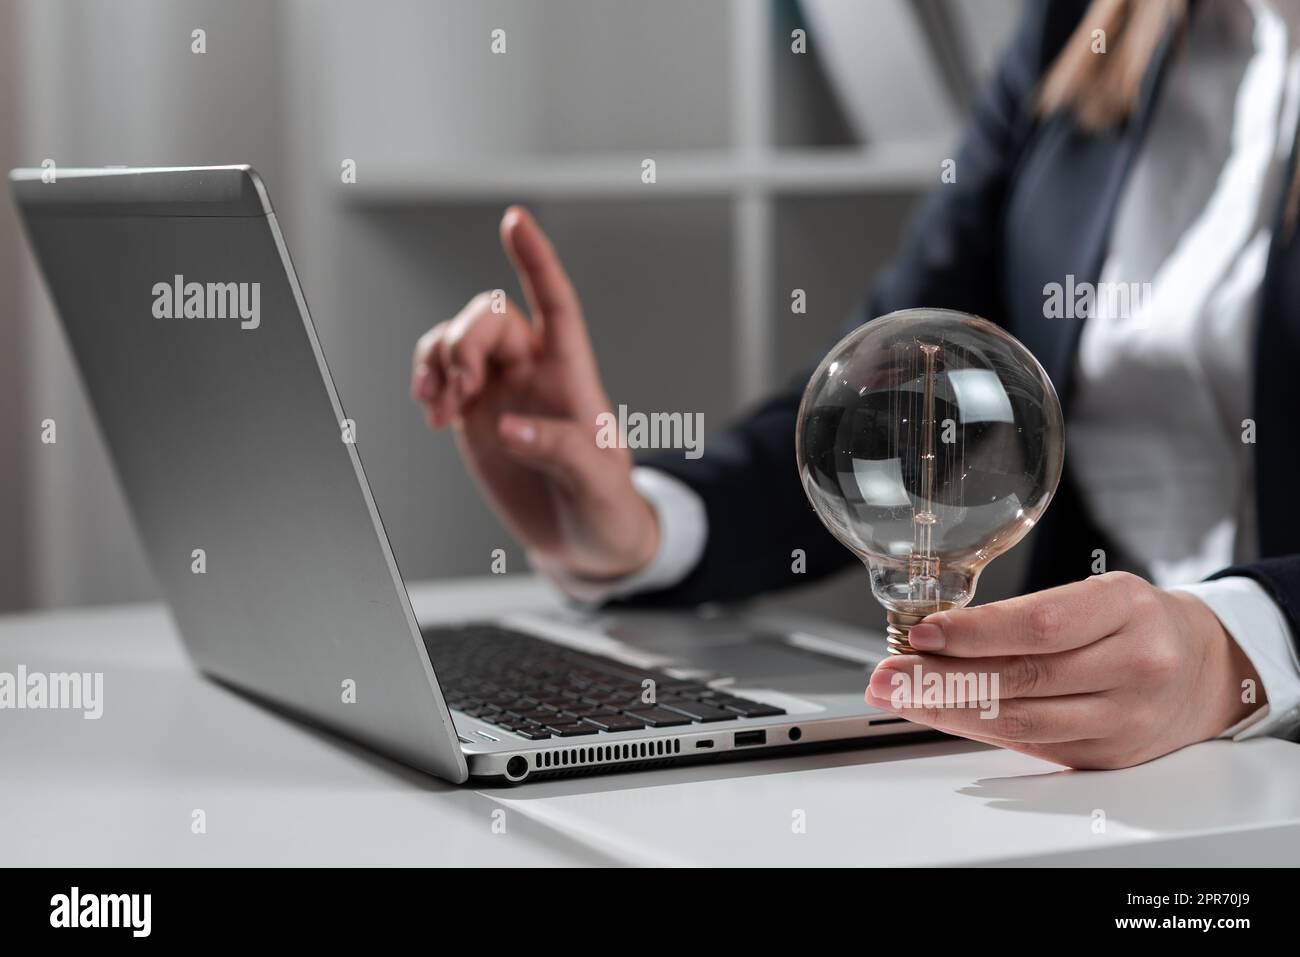 Businesswoman Pointing Recent Updates With One Finger On Desk Holding Lightbulb. Woman In Office Showing Important Message On Computer. Executive Presenting Crutial Data Into Pc. Stock Photo